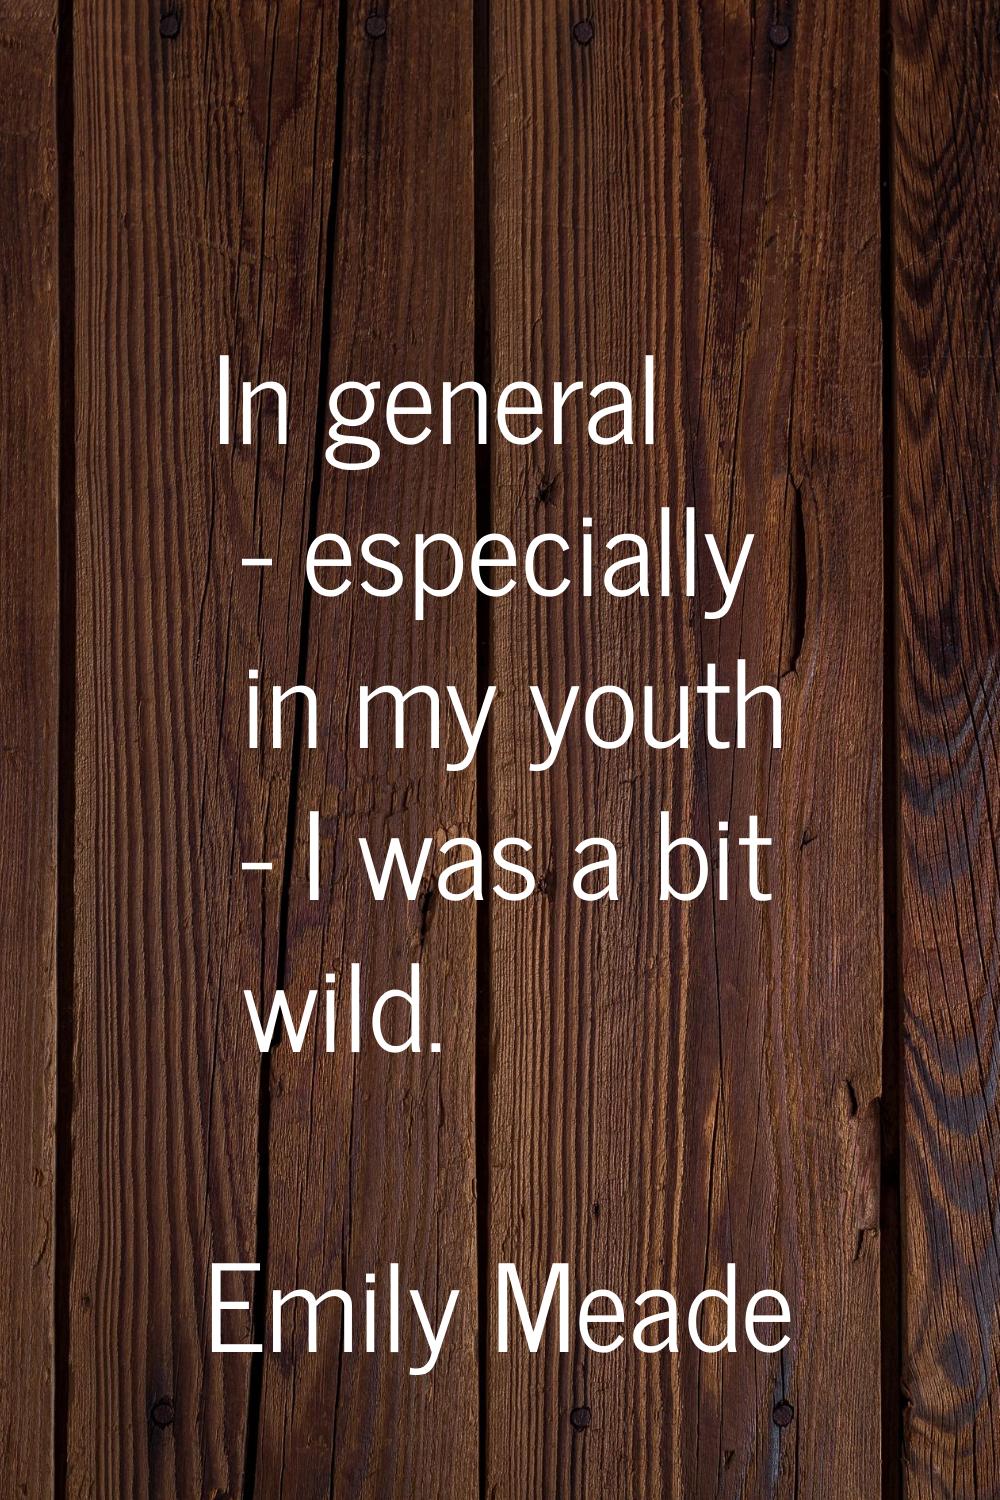 In general - especially in my youth - I was a bit wild.